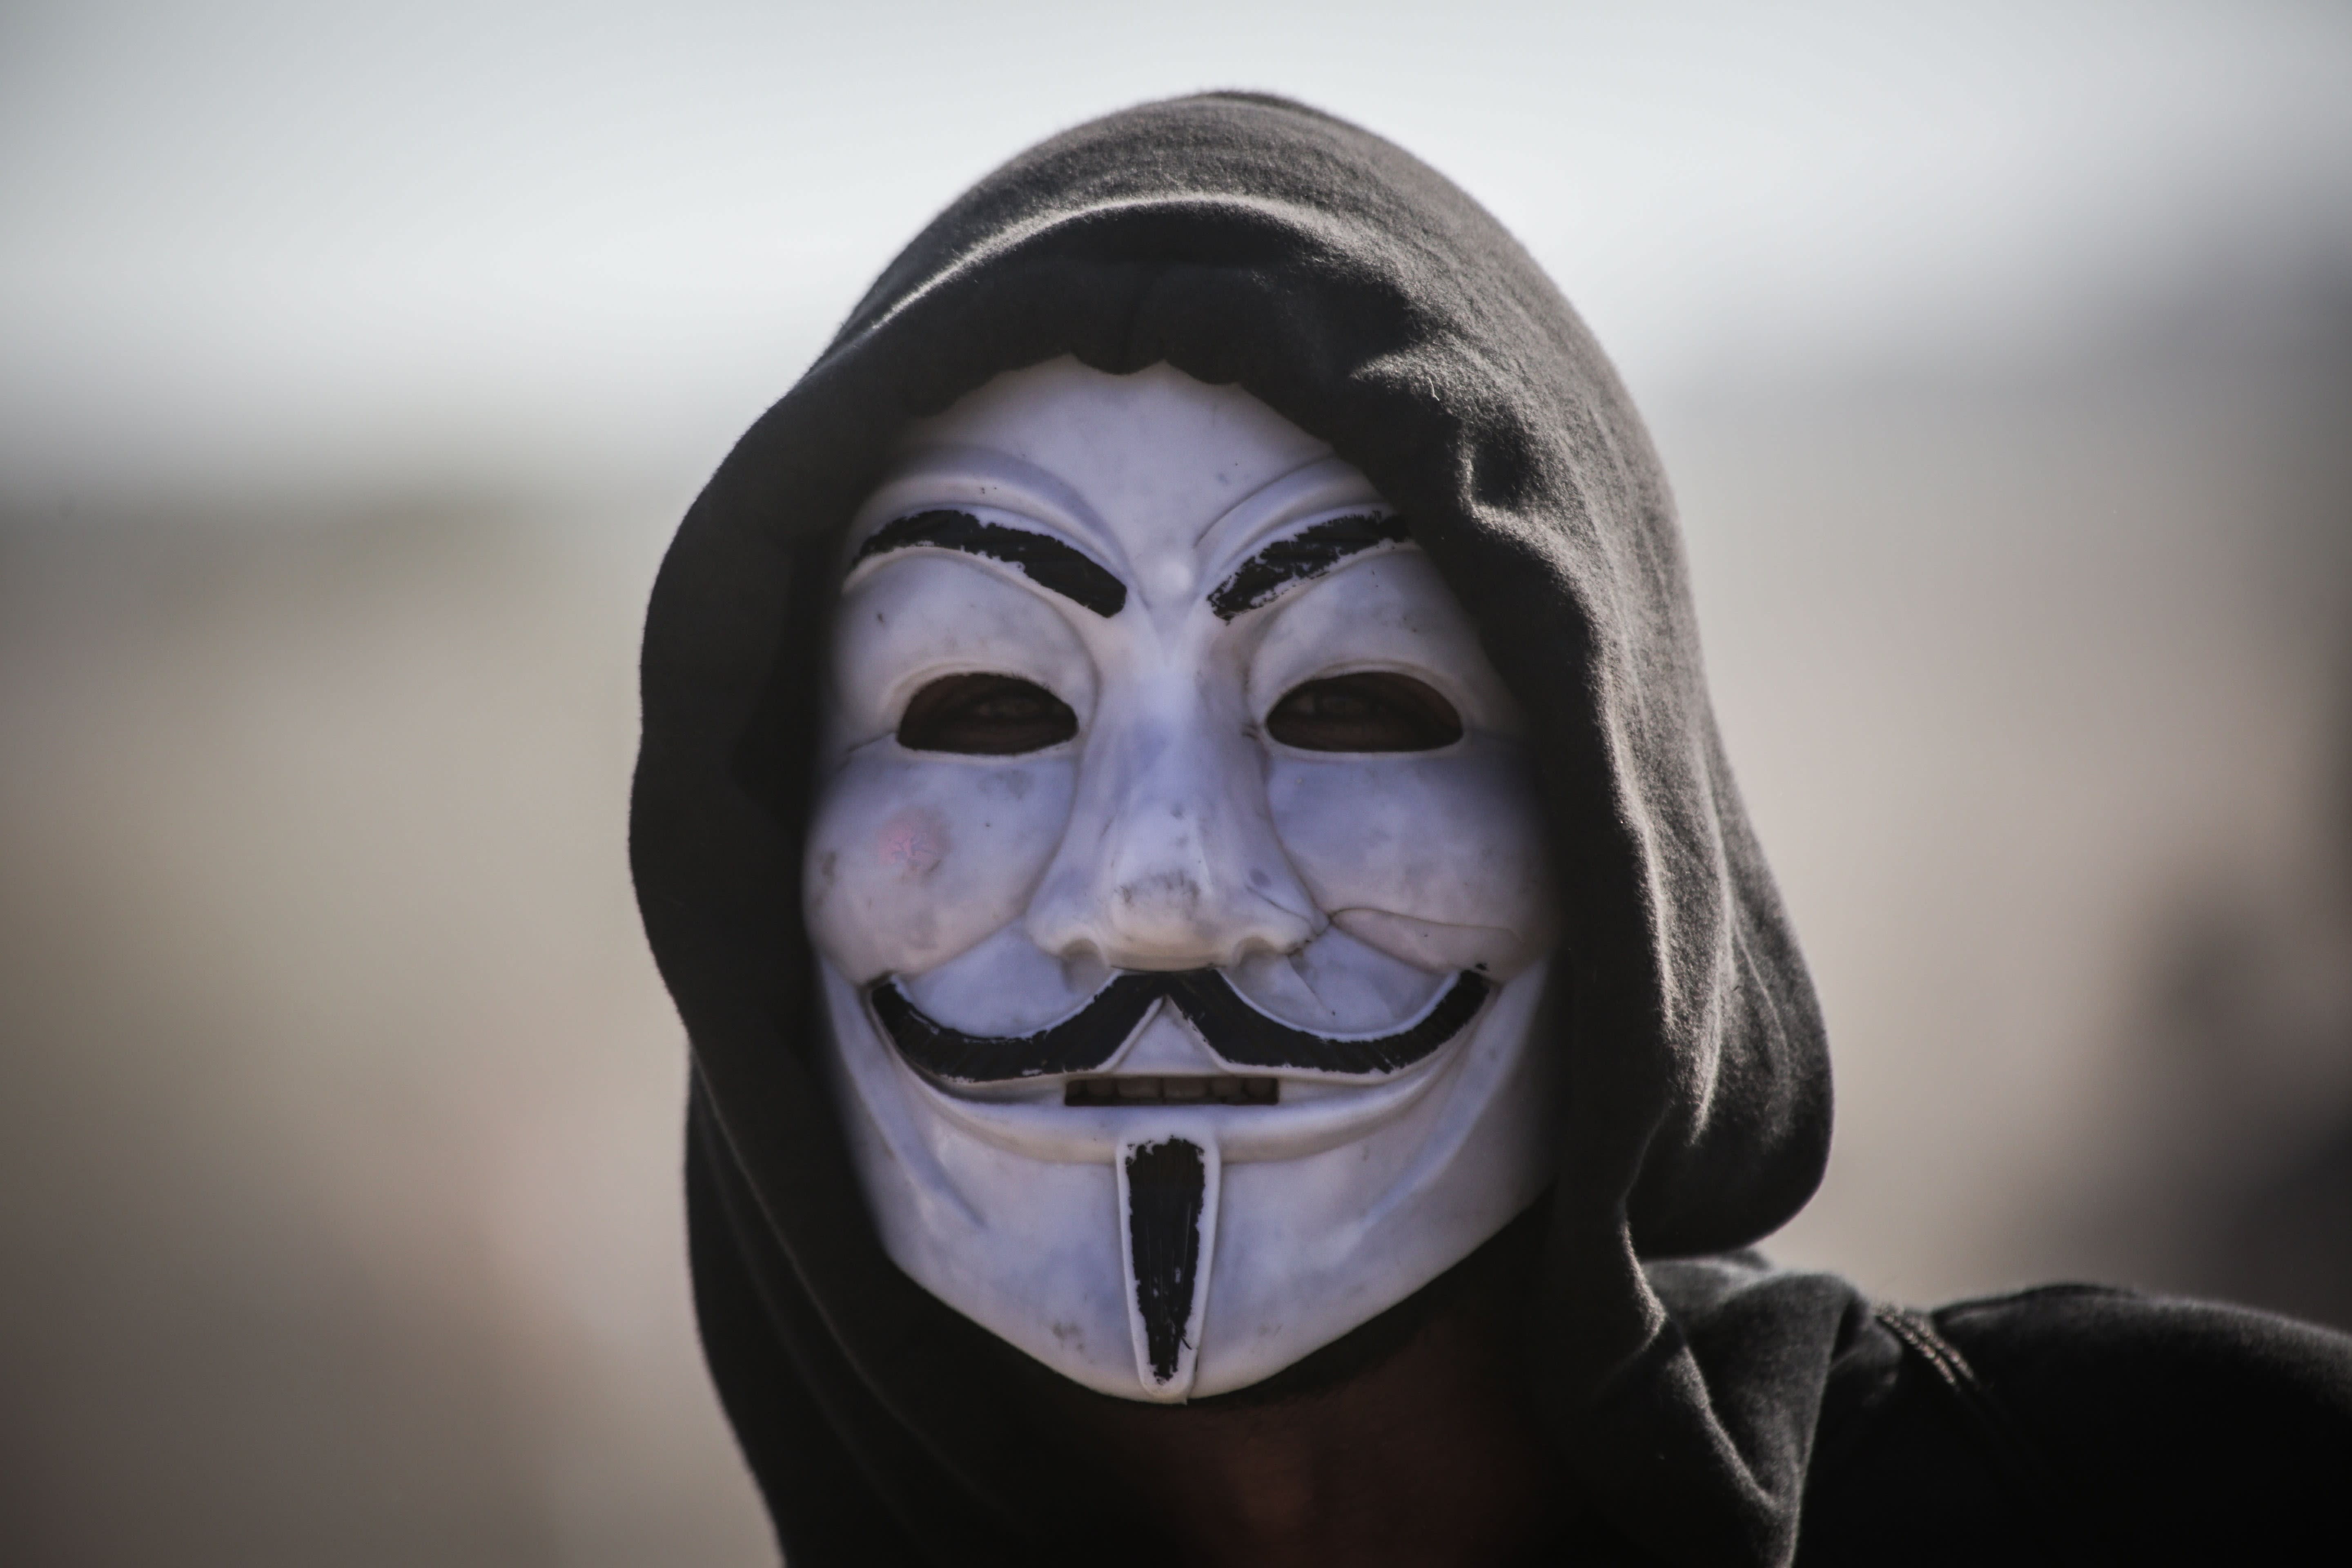 How do hackers mask their identity?